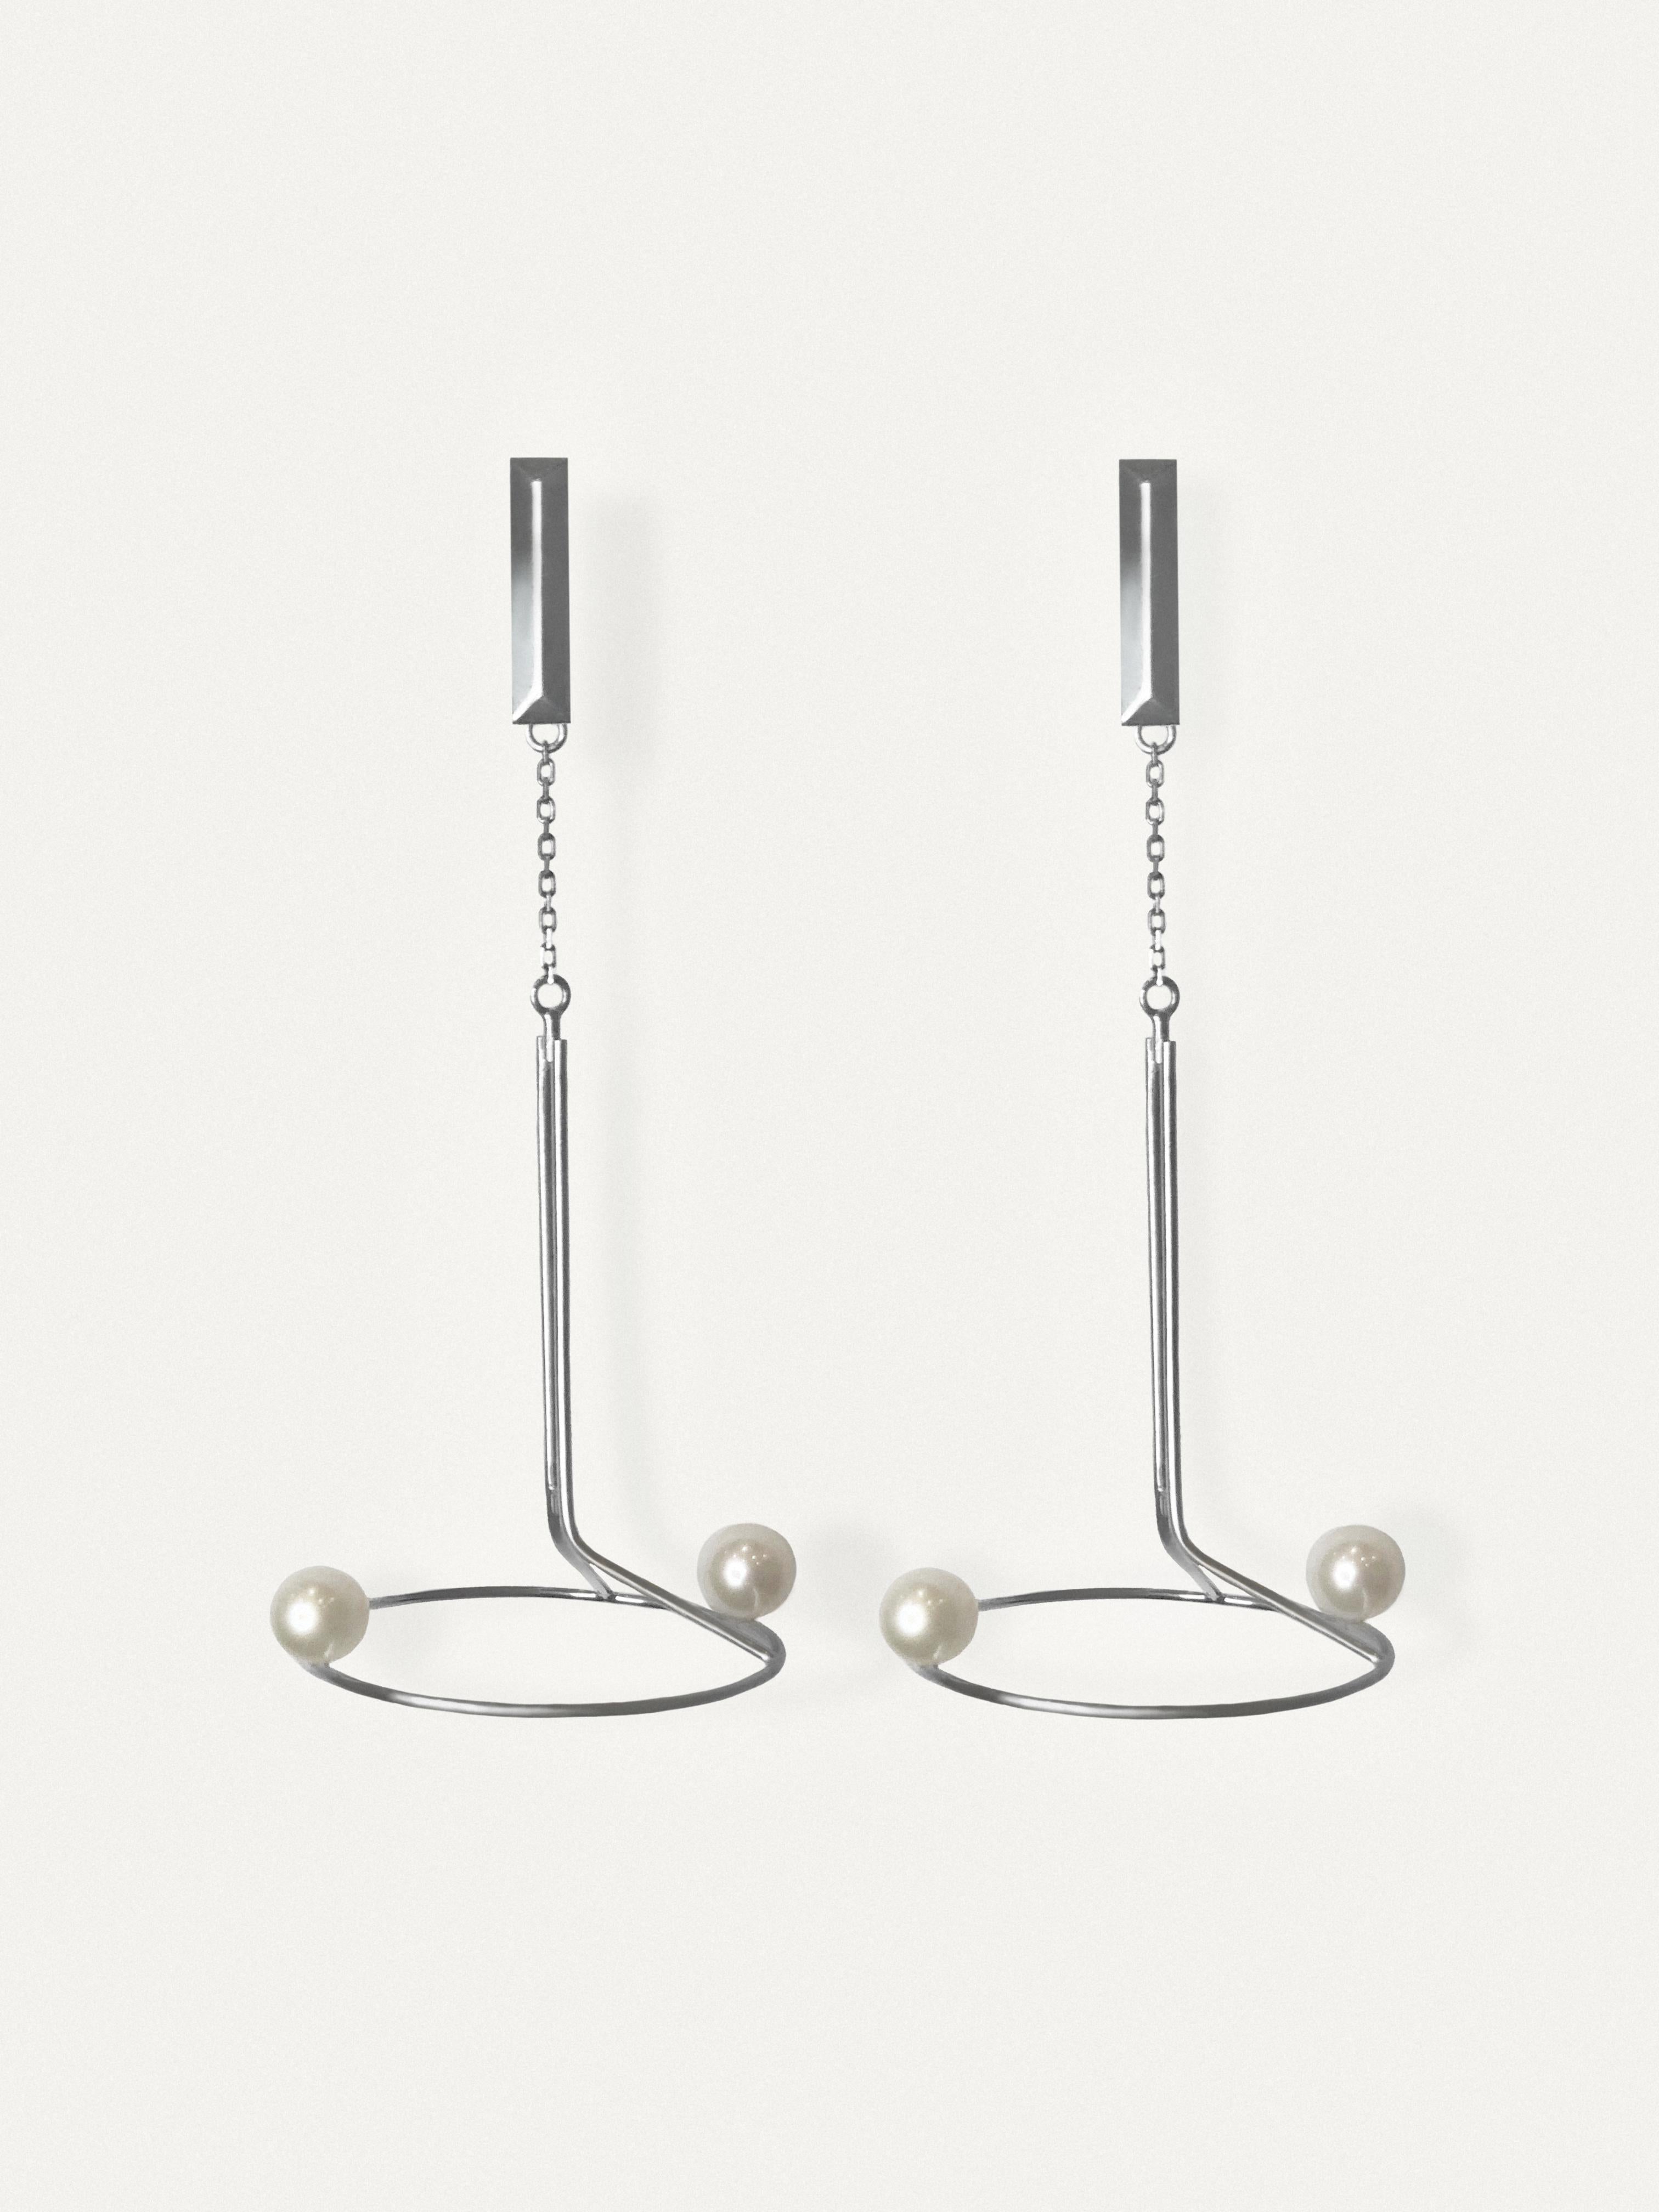 Modern Pair of Contemporary Silver Earrings 